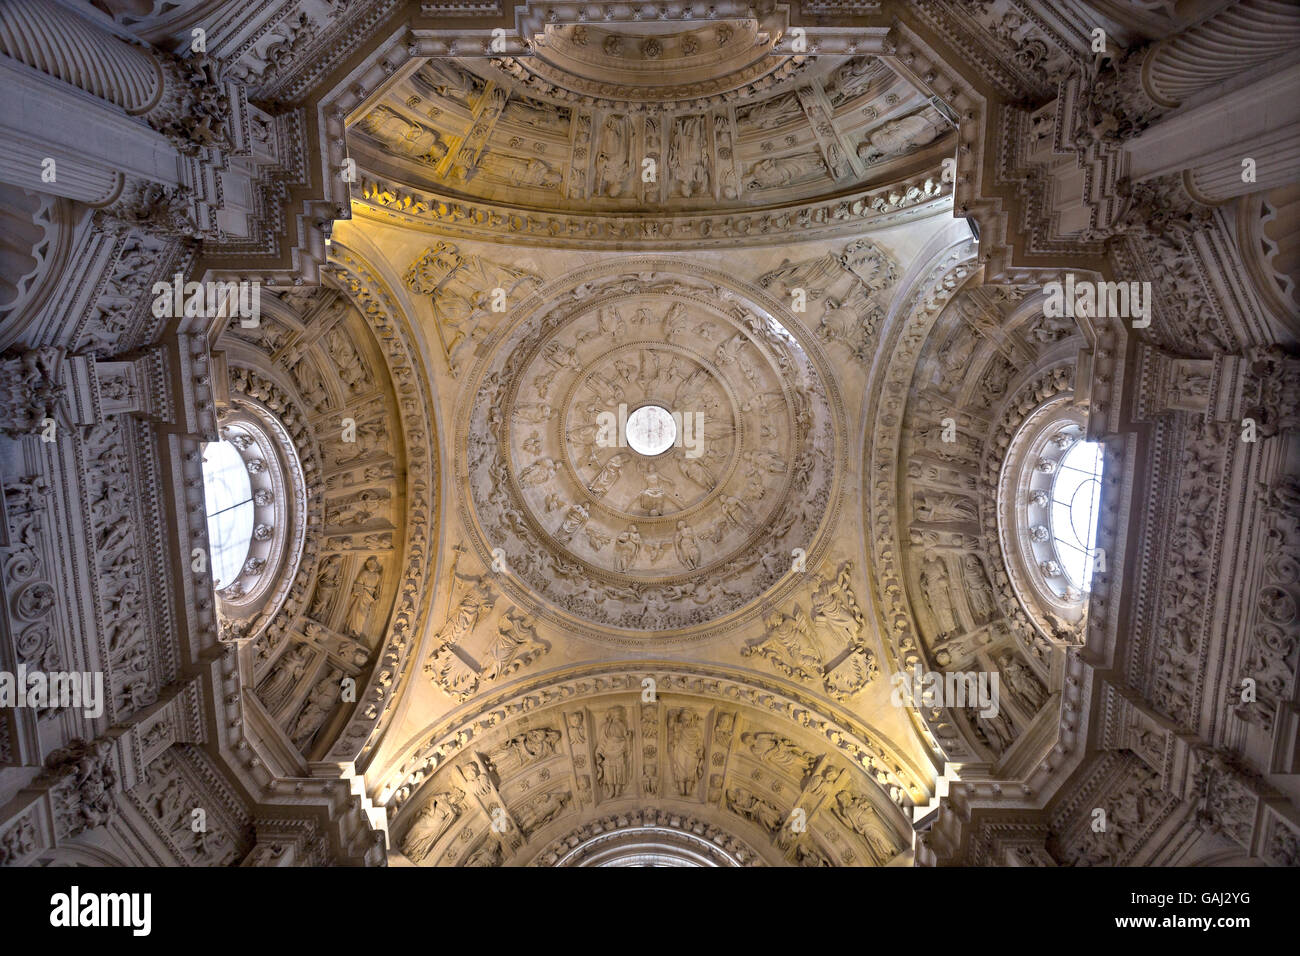 View of the domed ceiling of the Sacristia Mayor (Main Sacristy) of the Cathedral of Seville, Spain Stock Photo